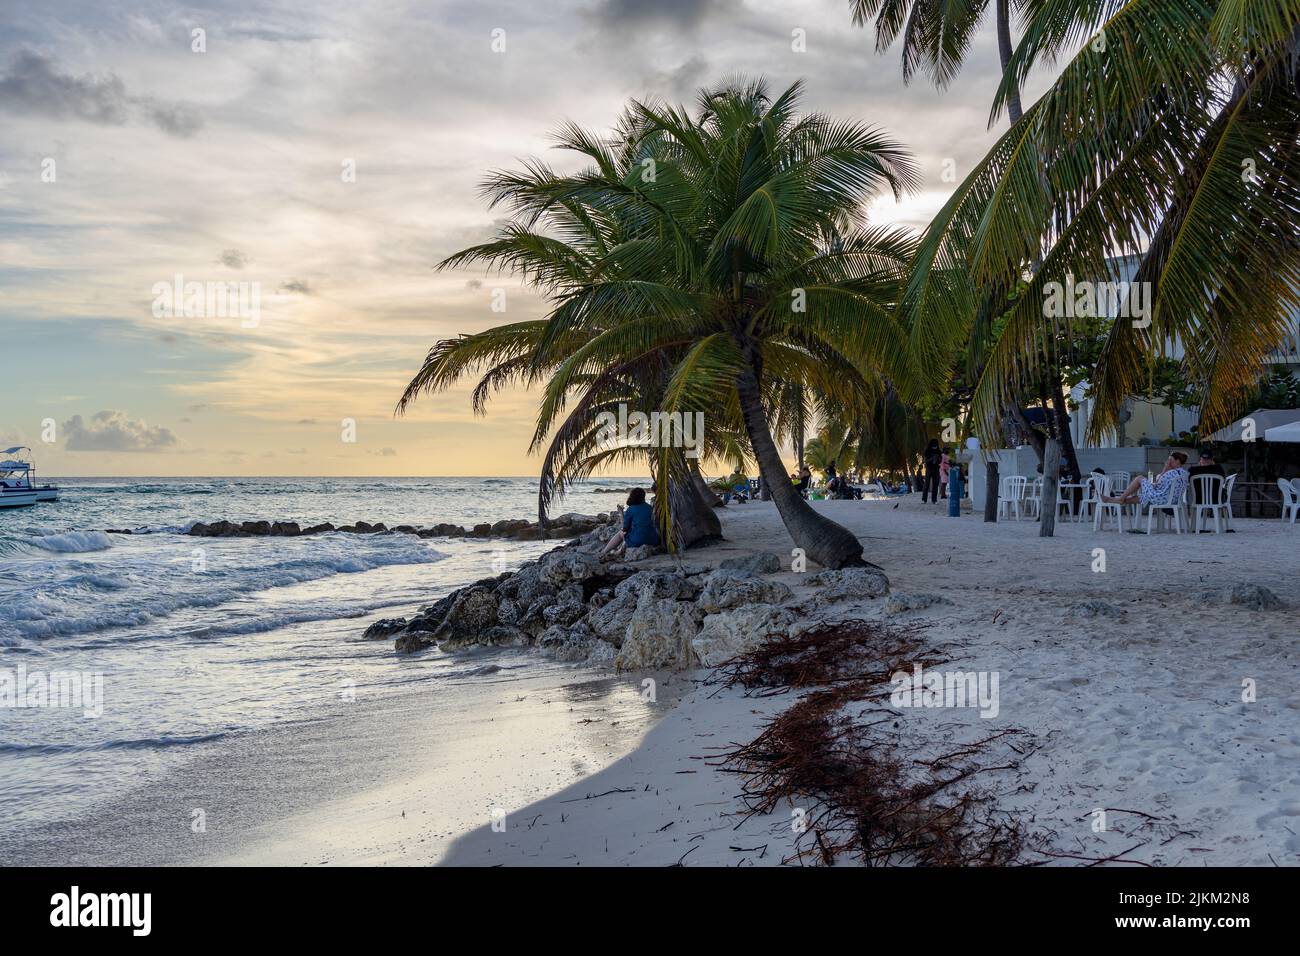 A beautiful shot of palm trees in the evening on Worthing Beach in Worthing, Barbados Stock Photo